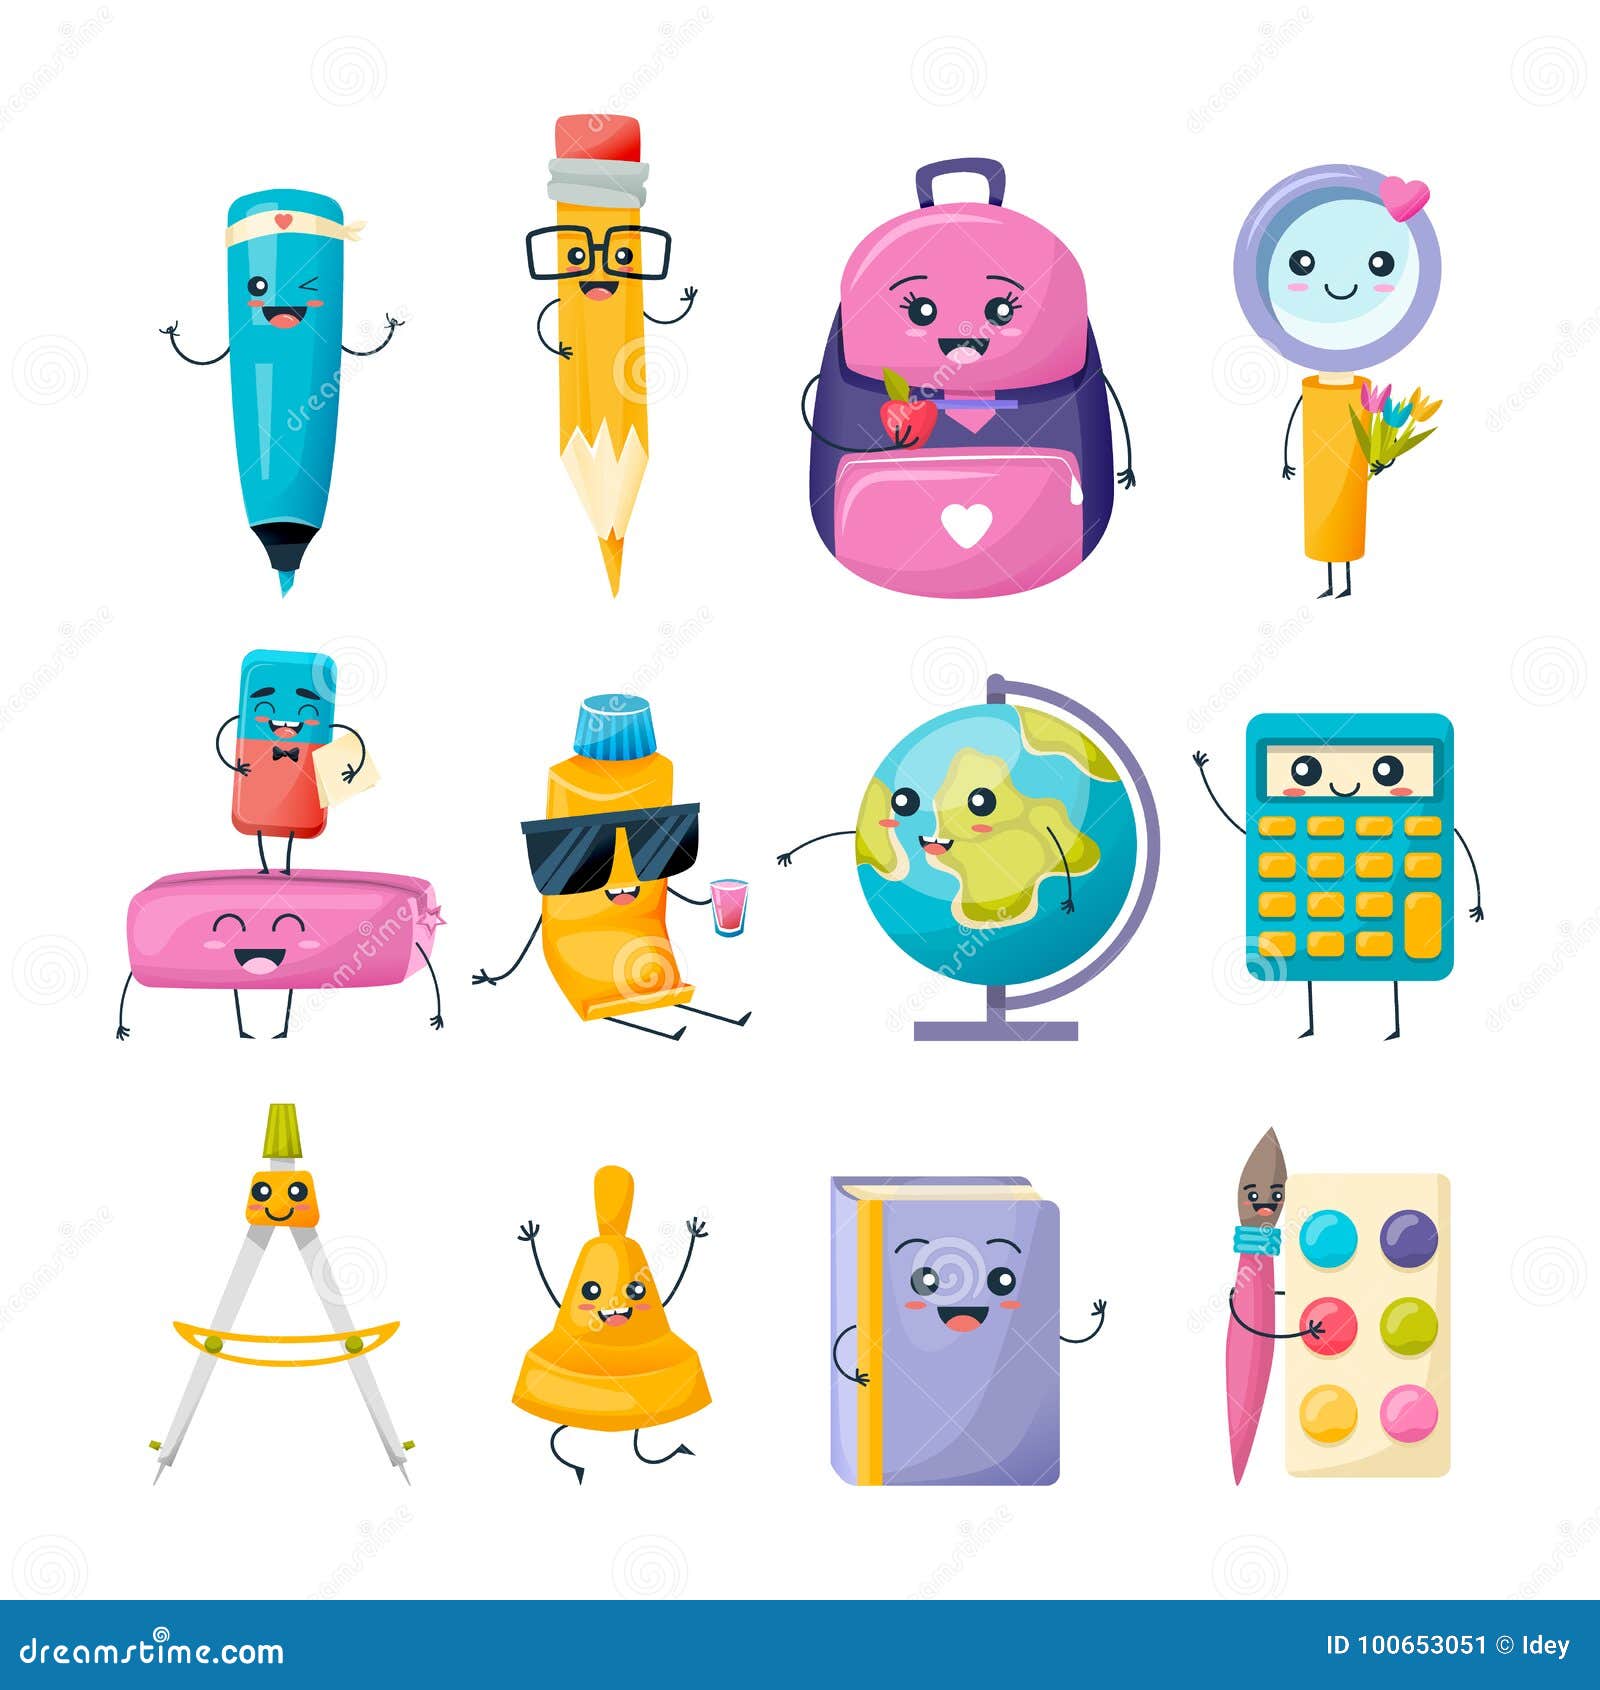 https://thumbs.dreamstime.com/z/set-school-funny-office-supplies-characters-writing-stationery-merry-education-marker-pencil-backpack-magnifier-erasers-tube-100653051.jpg